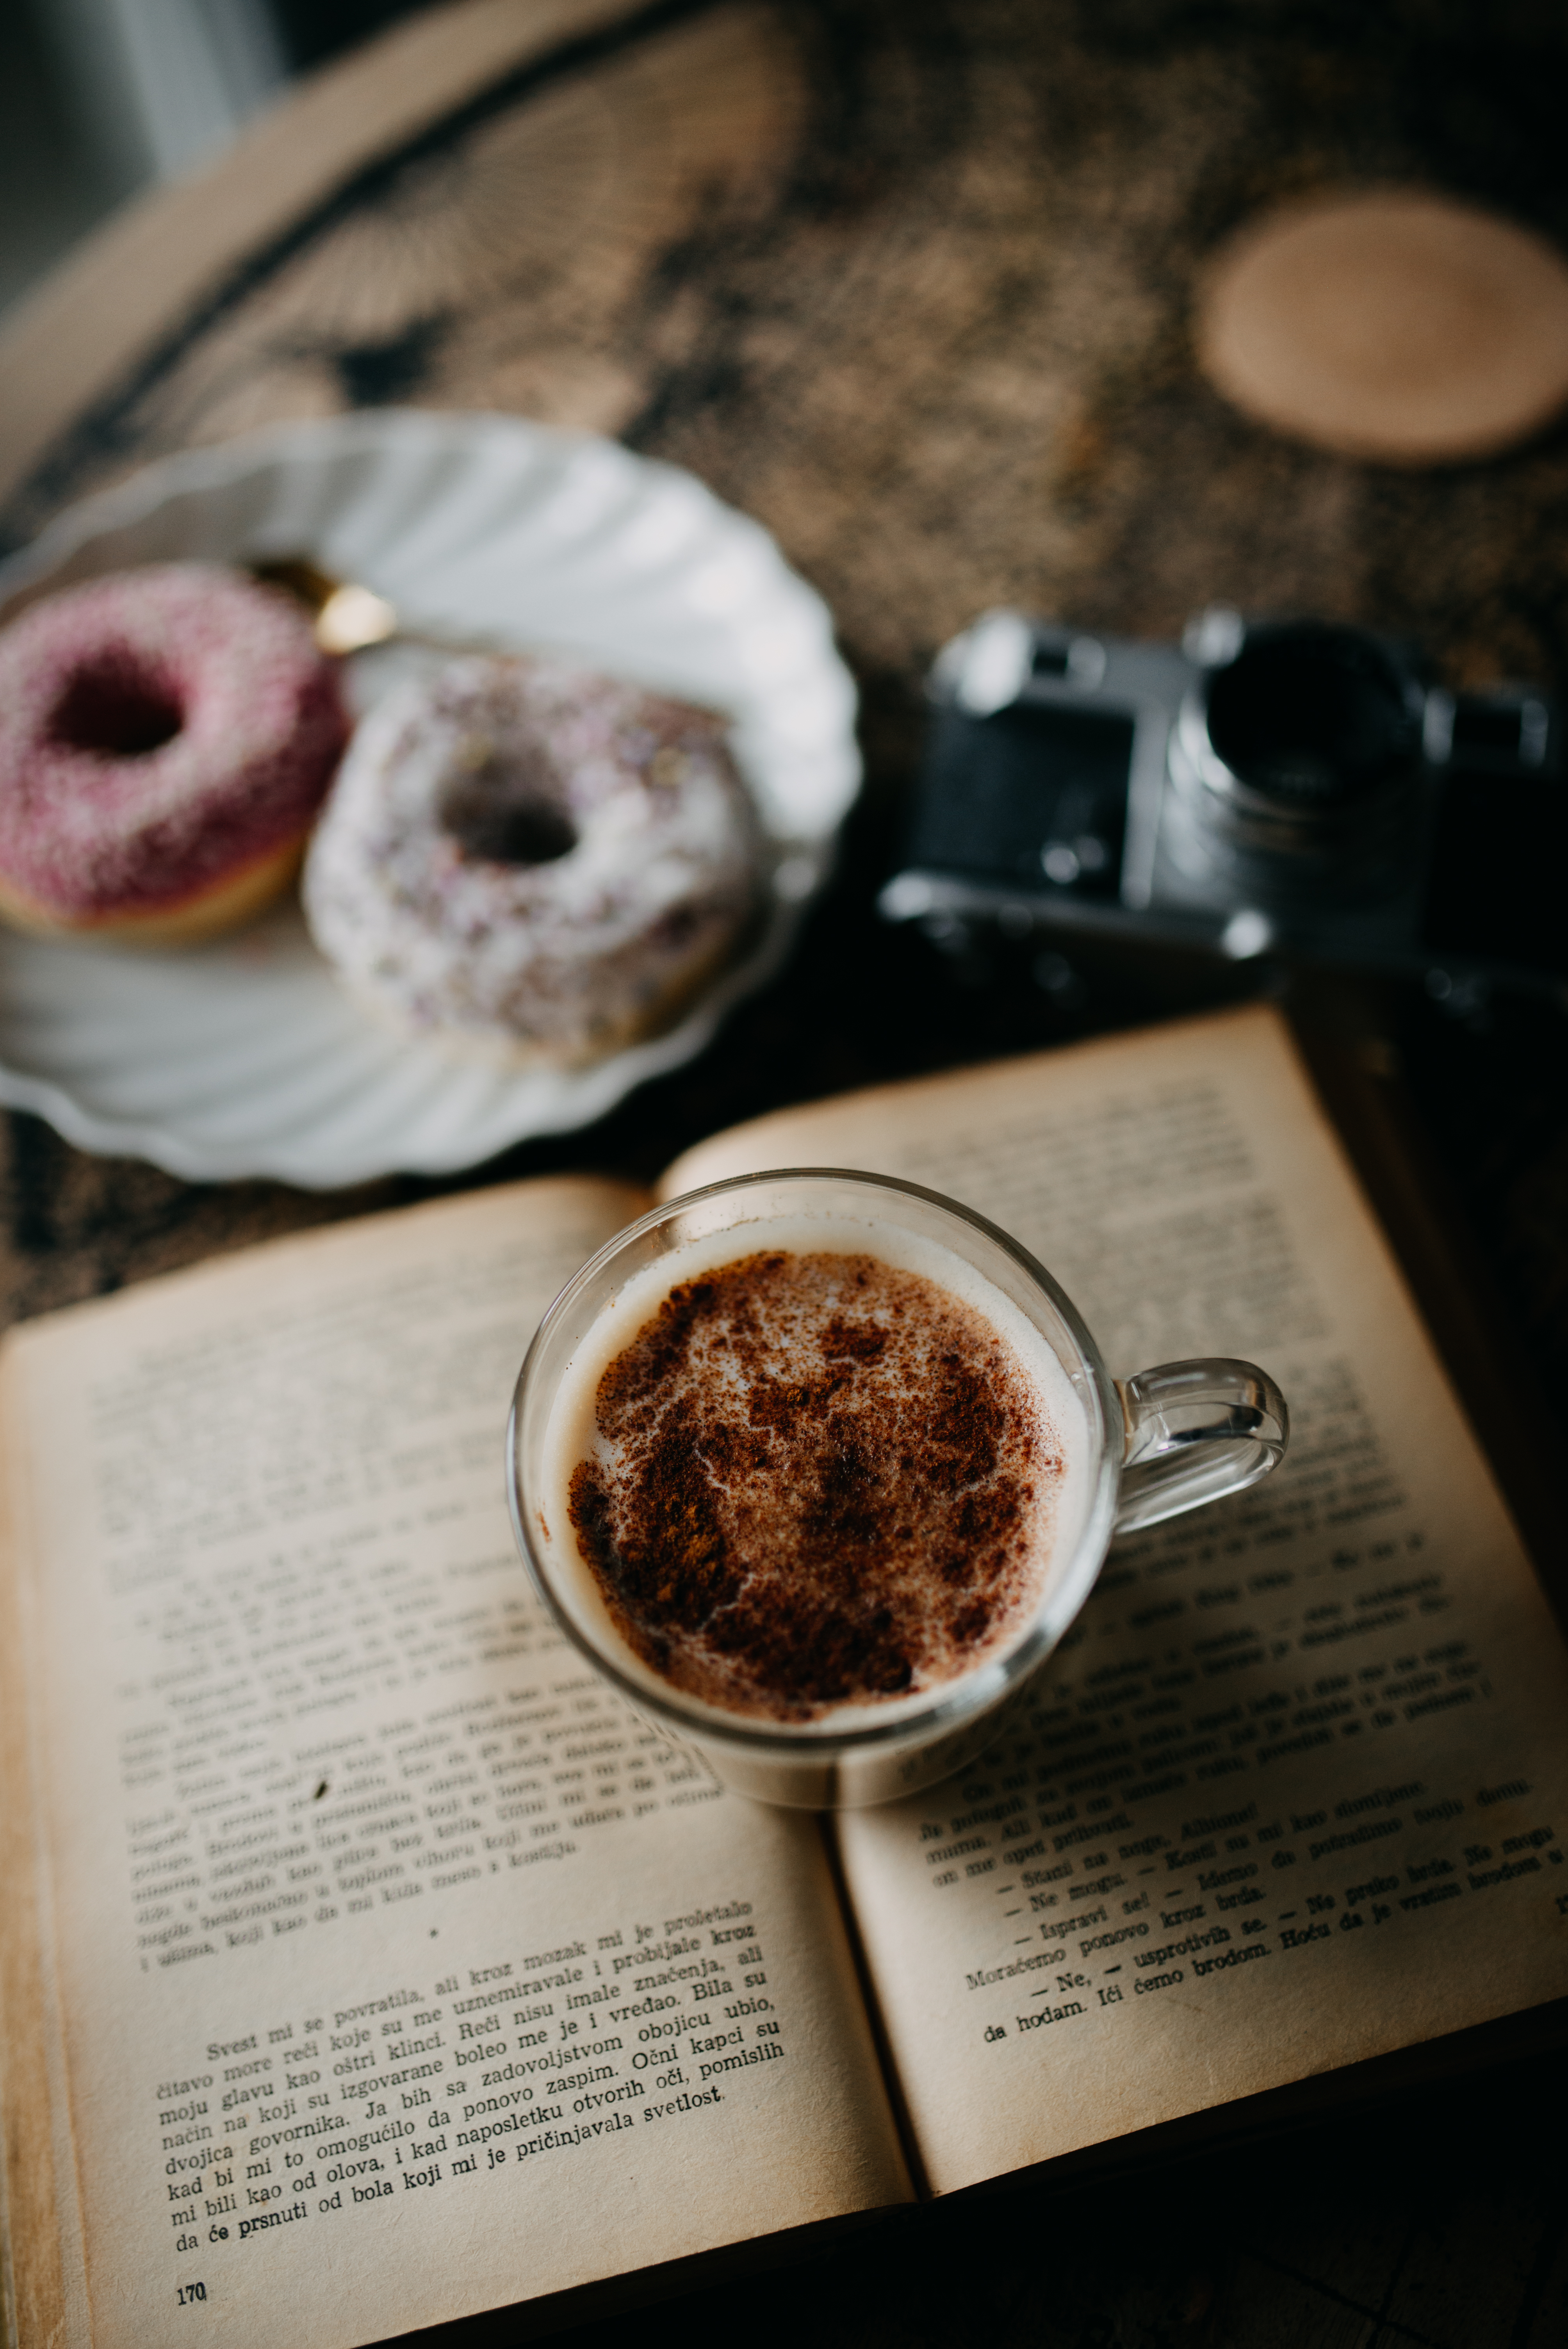 150751 download wallpaper food, desert, coffee, cup, book, camera, mug, donuts screensavers and pictures for free